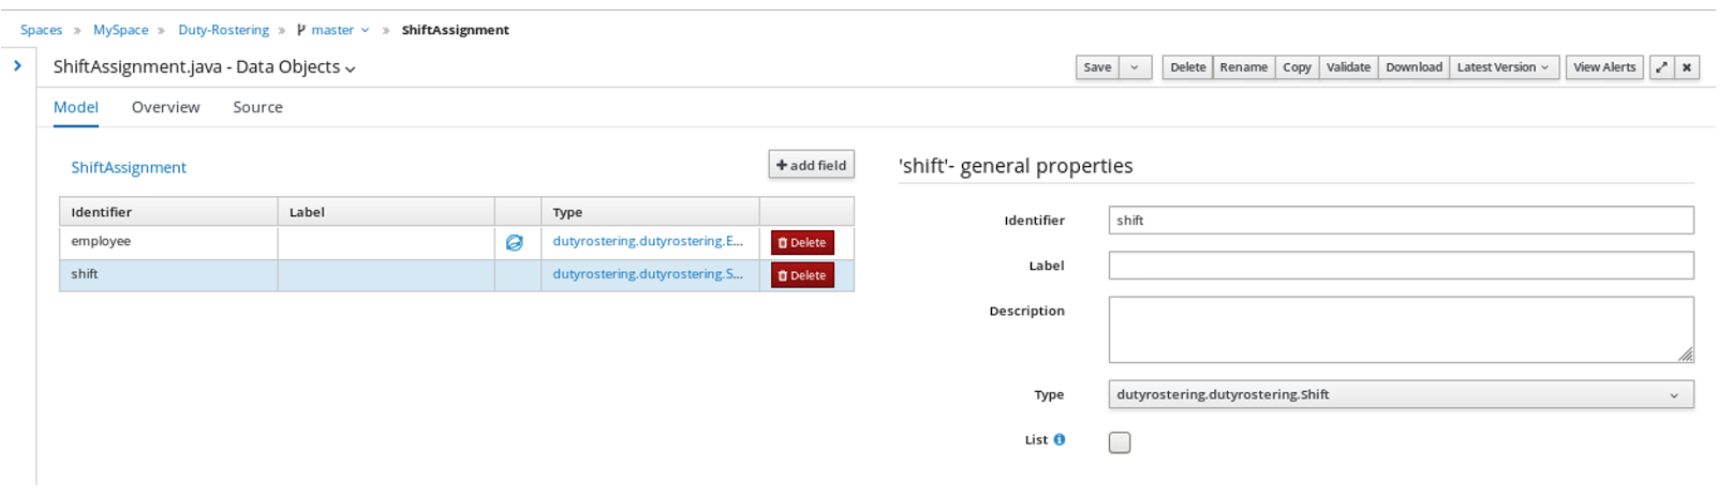 Creating the data object for ShiftAssignment in Decision Central